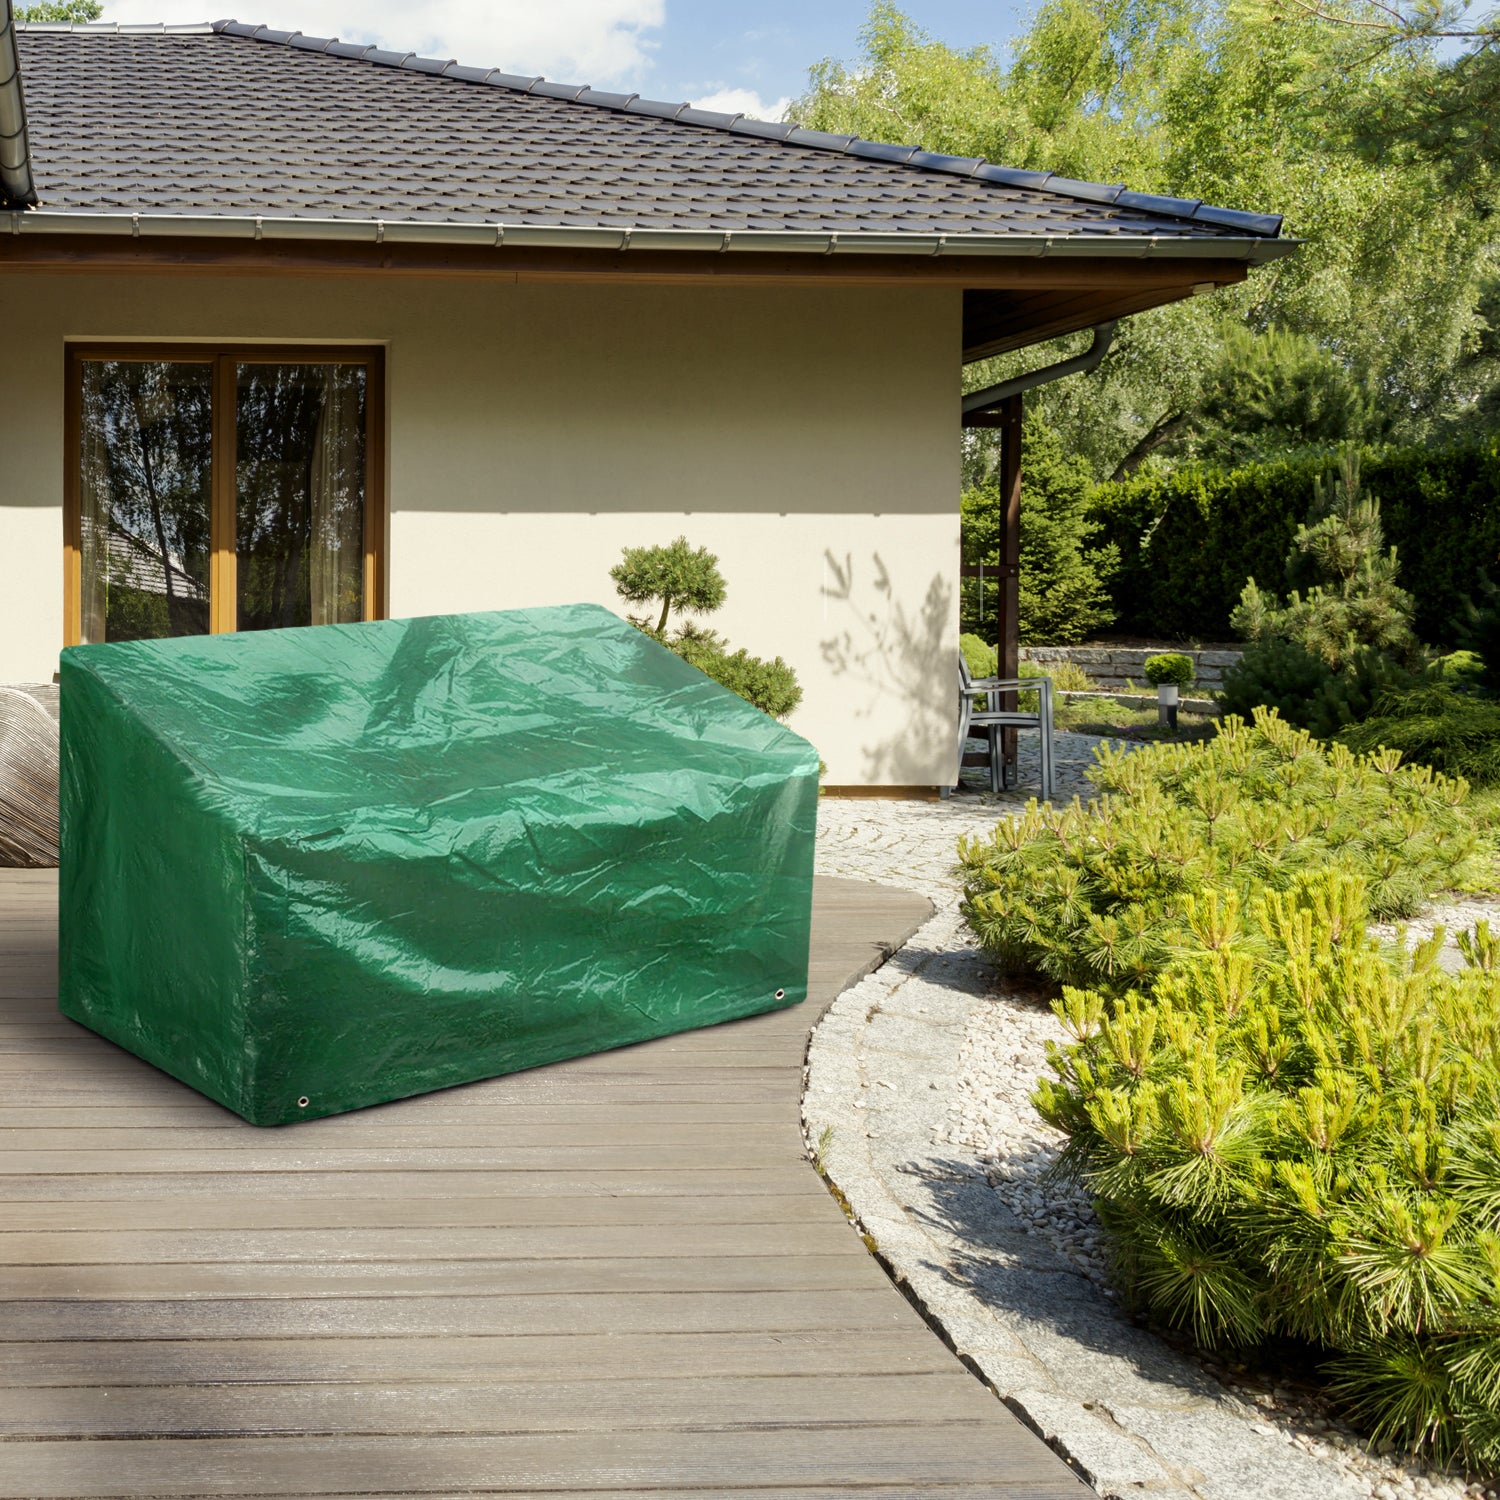 3 Seat Garden Bench Cover - Waterproof, Tear Resistant and UV Protection